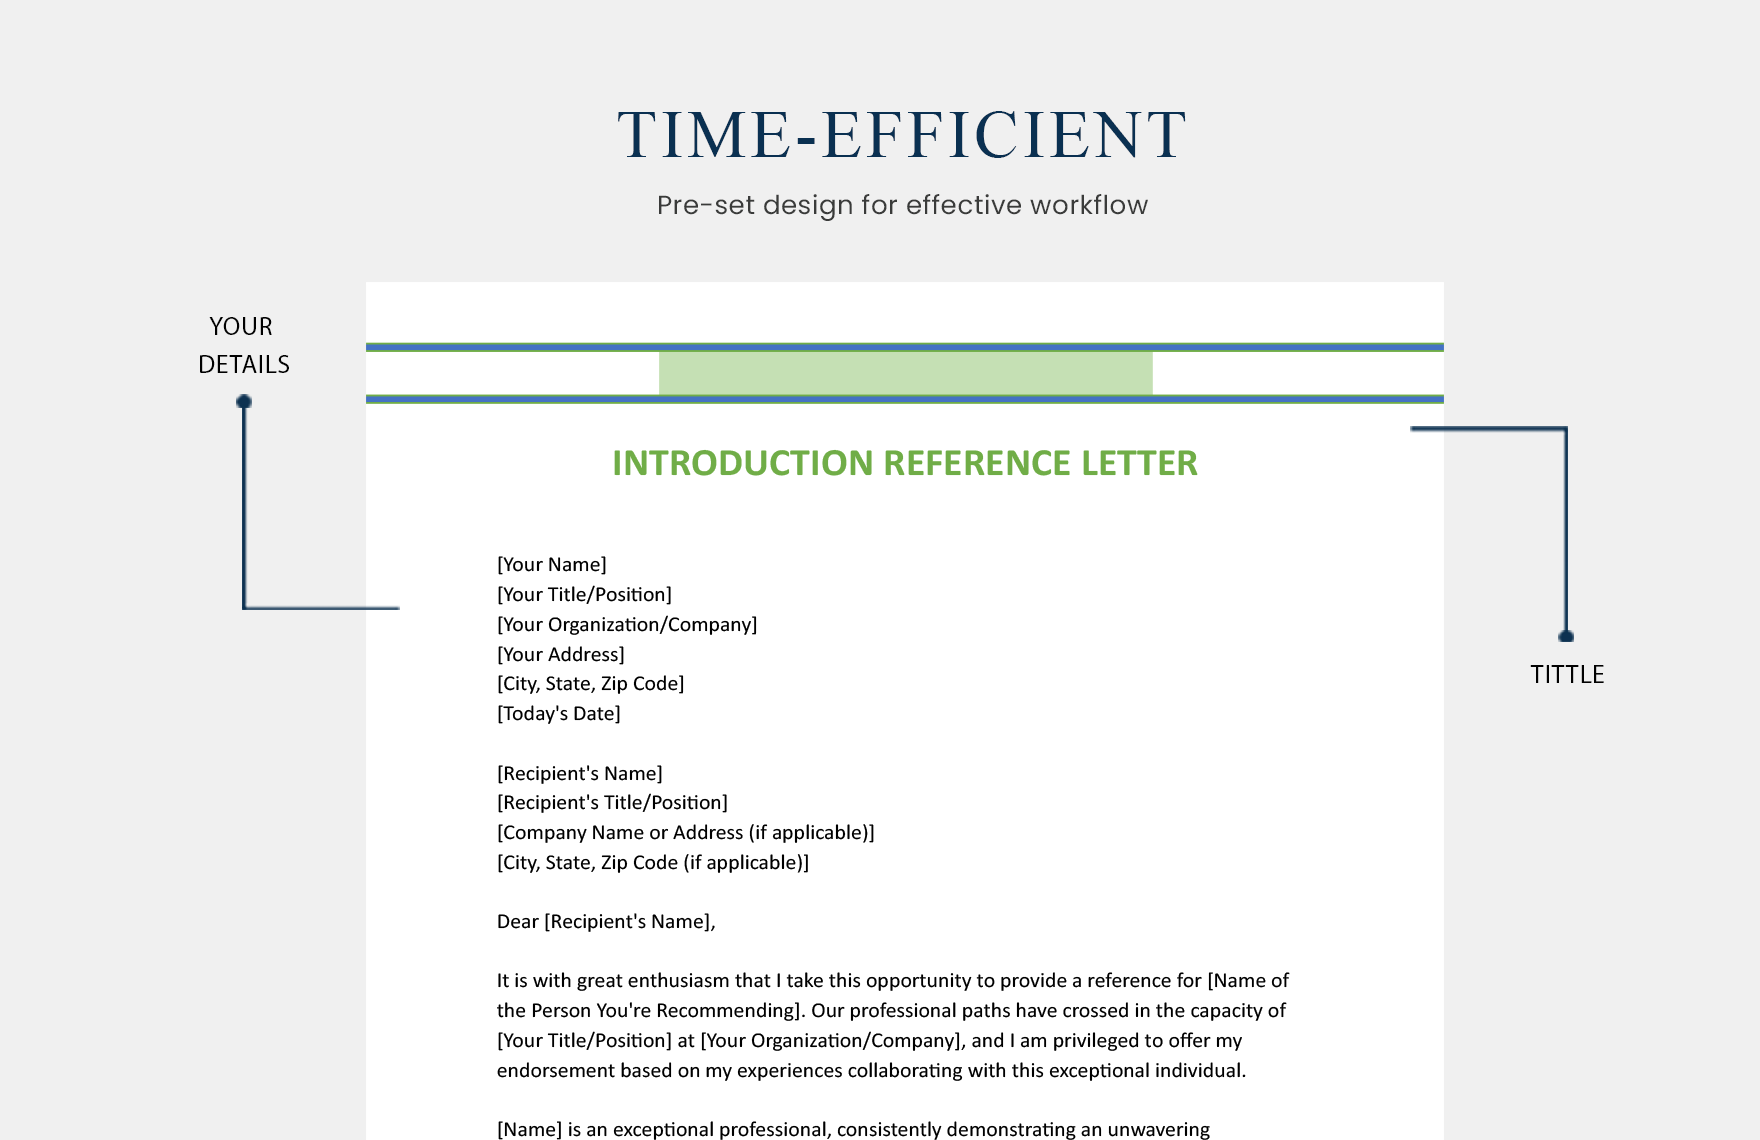 Introduction Reference Letter